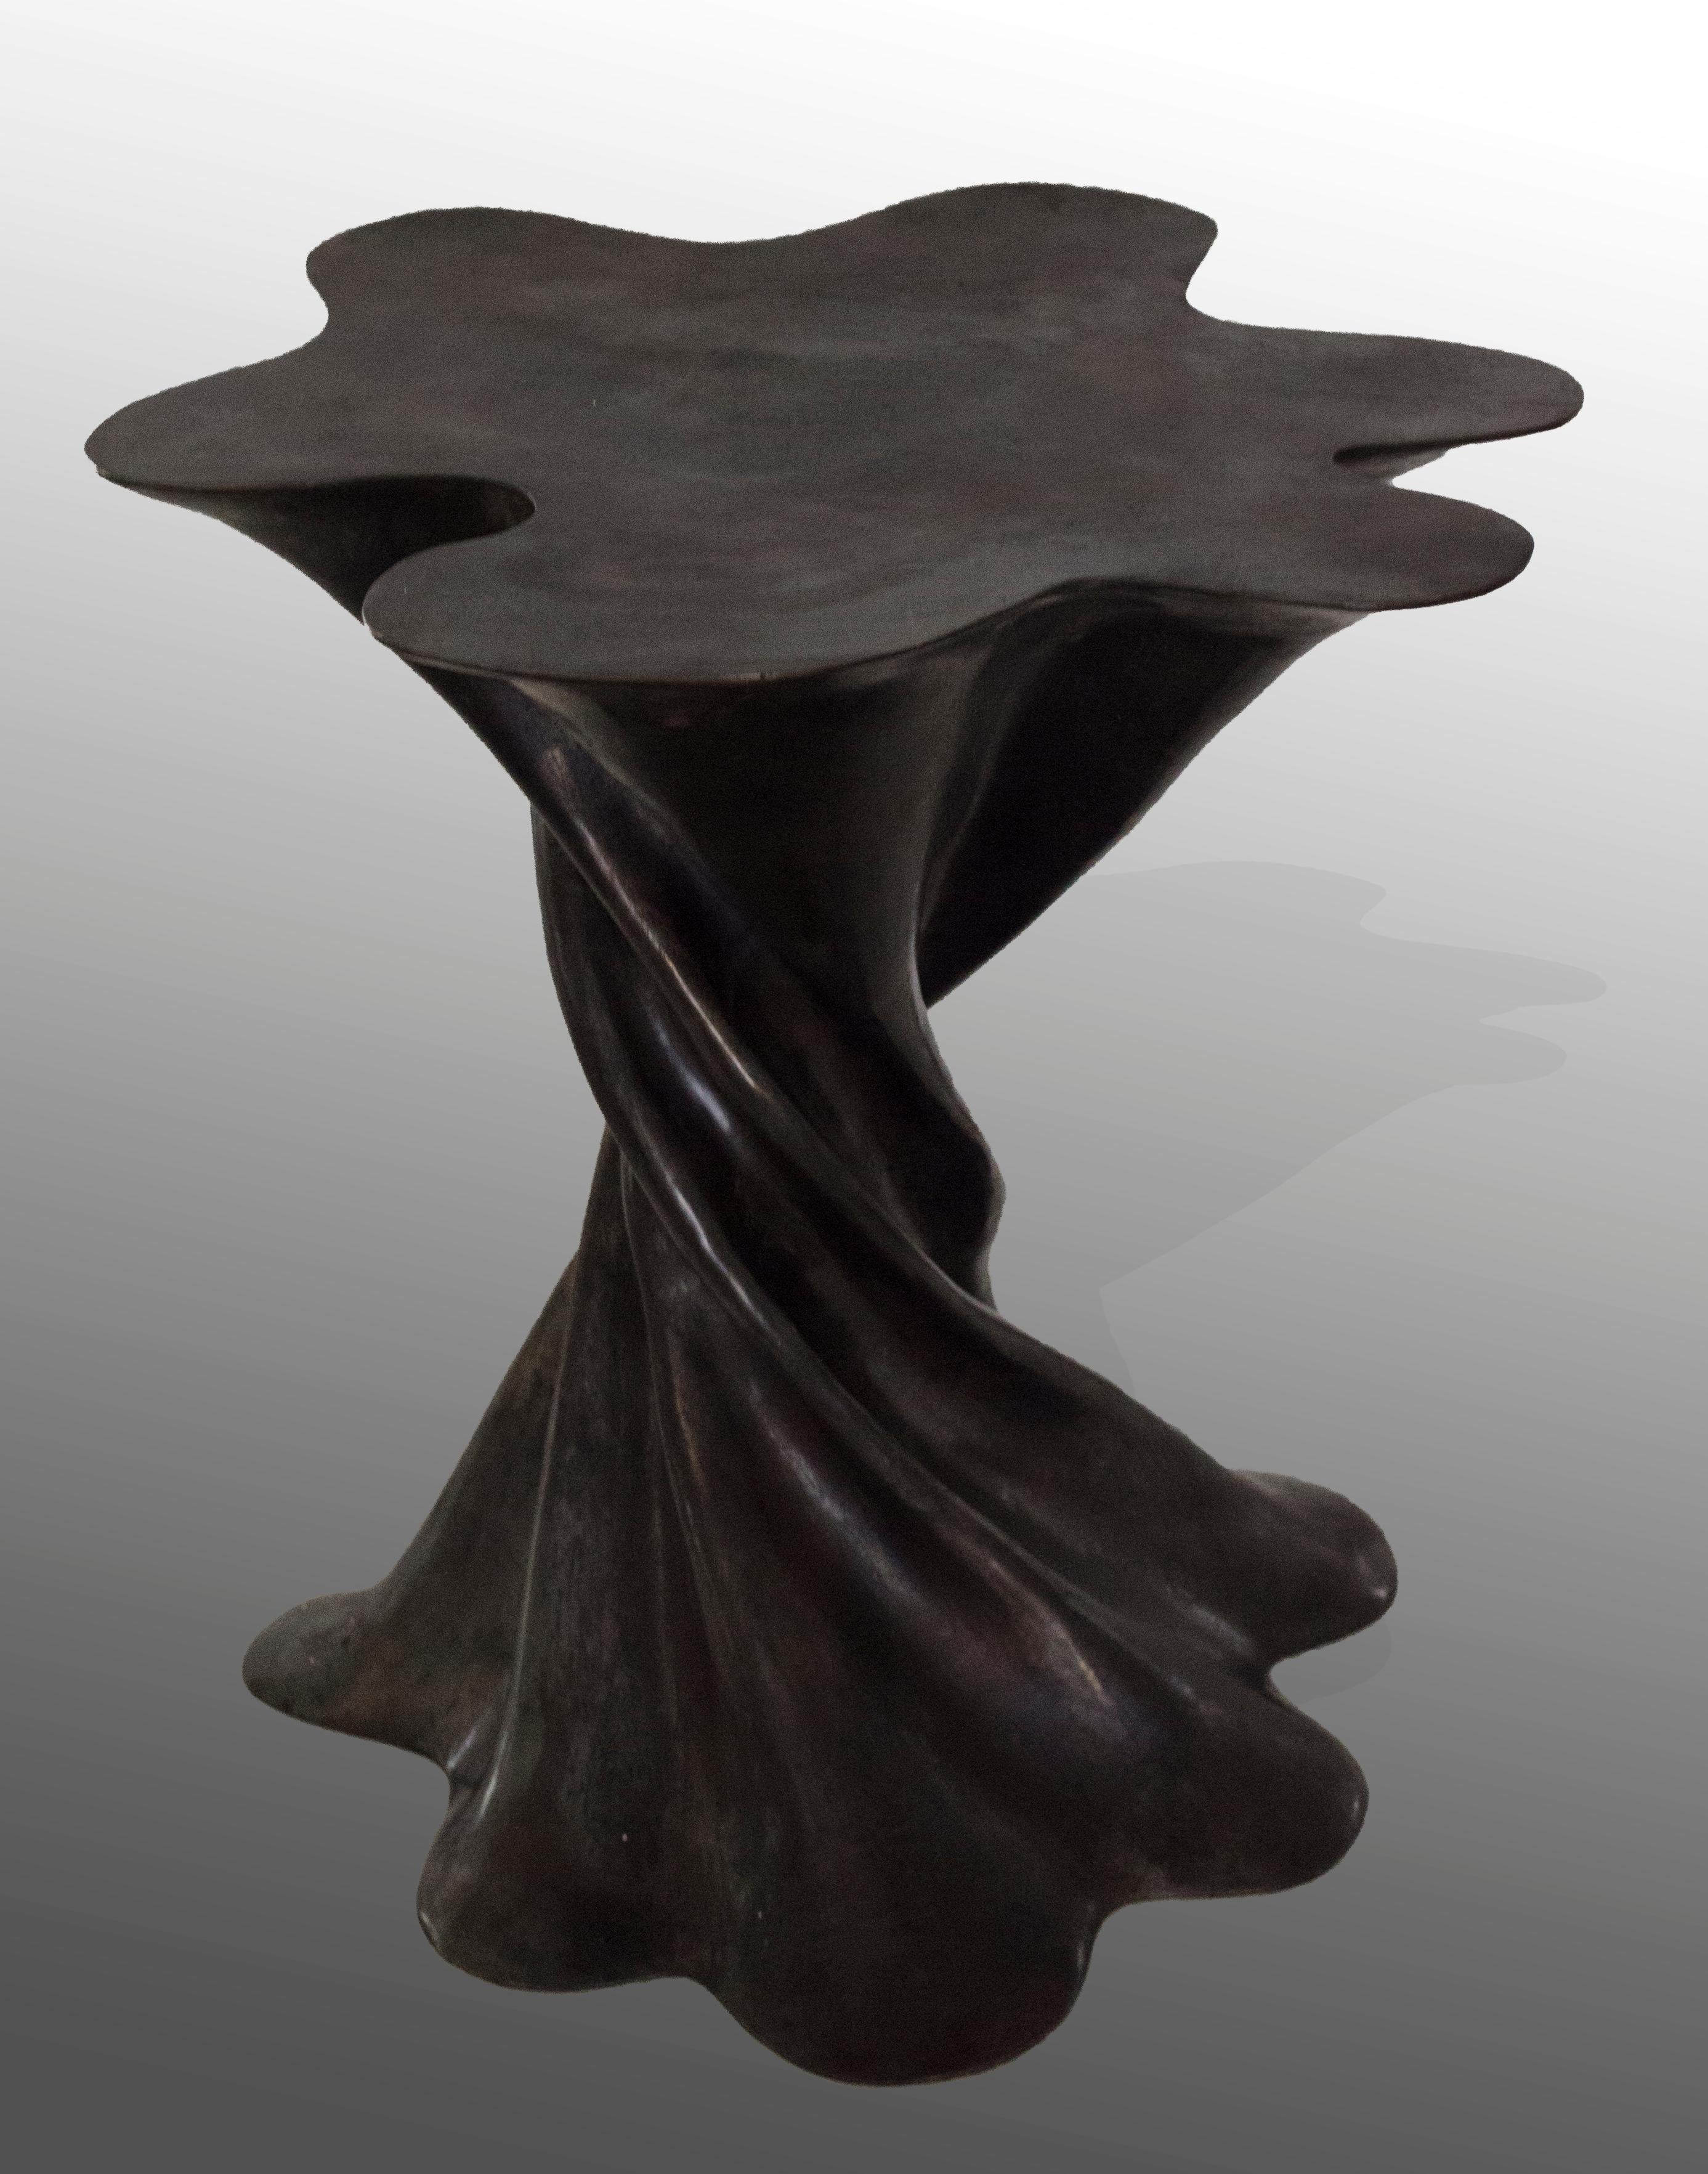 With her love of fabrics and her interest how they work in motion, Stephanie Odegard deisgned this table using the pleats in a dancer's skirt as an inspiration for the Waltz side table. Available in 9 different patinas over cast brass, this piece is